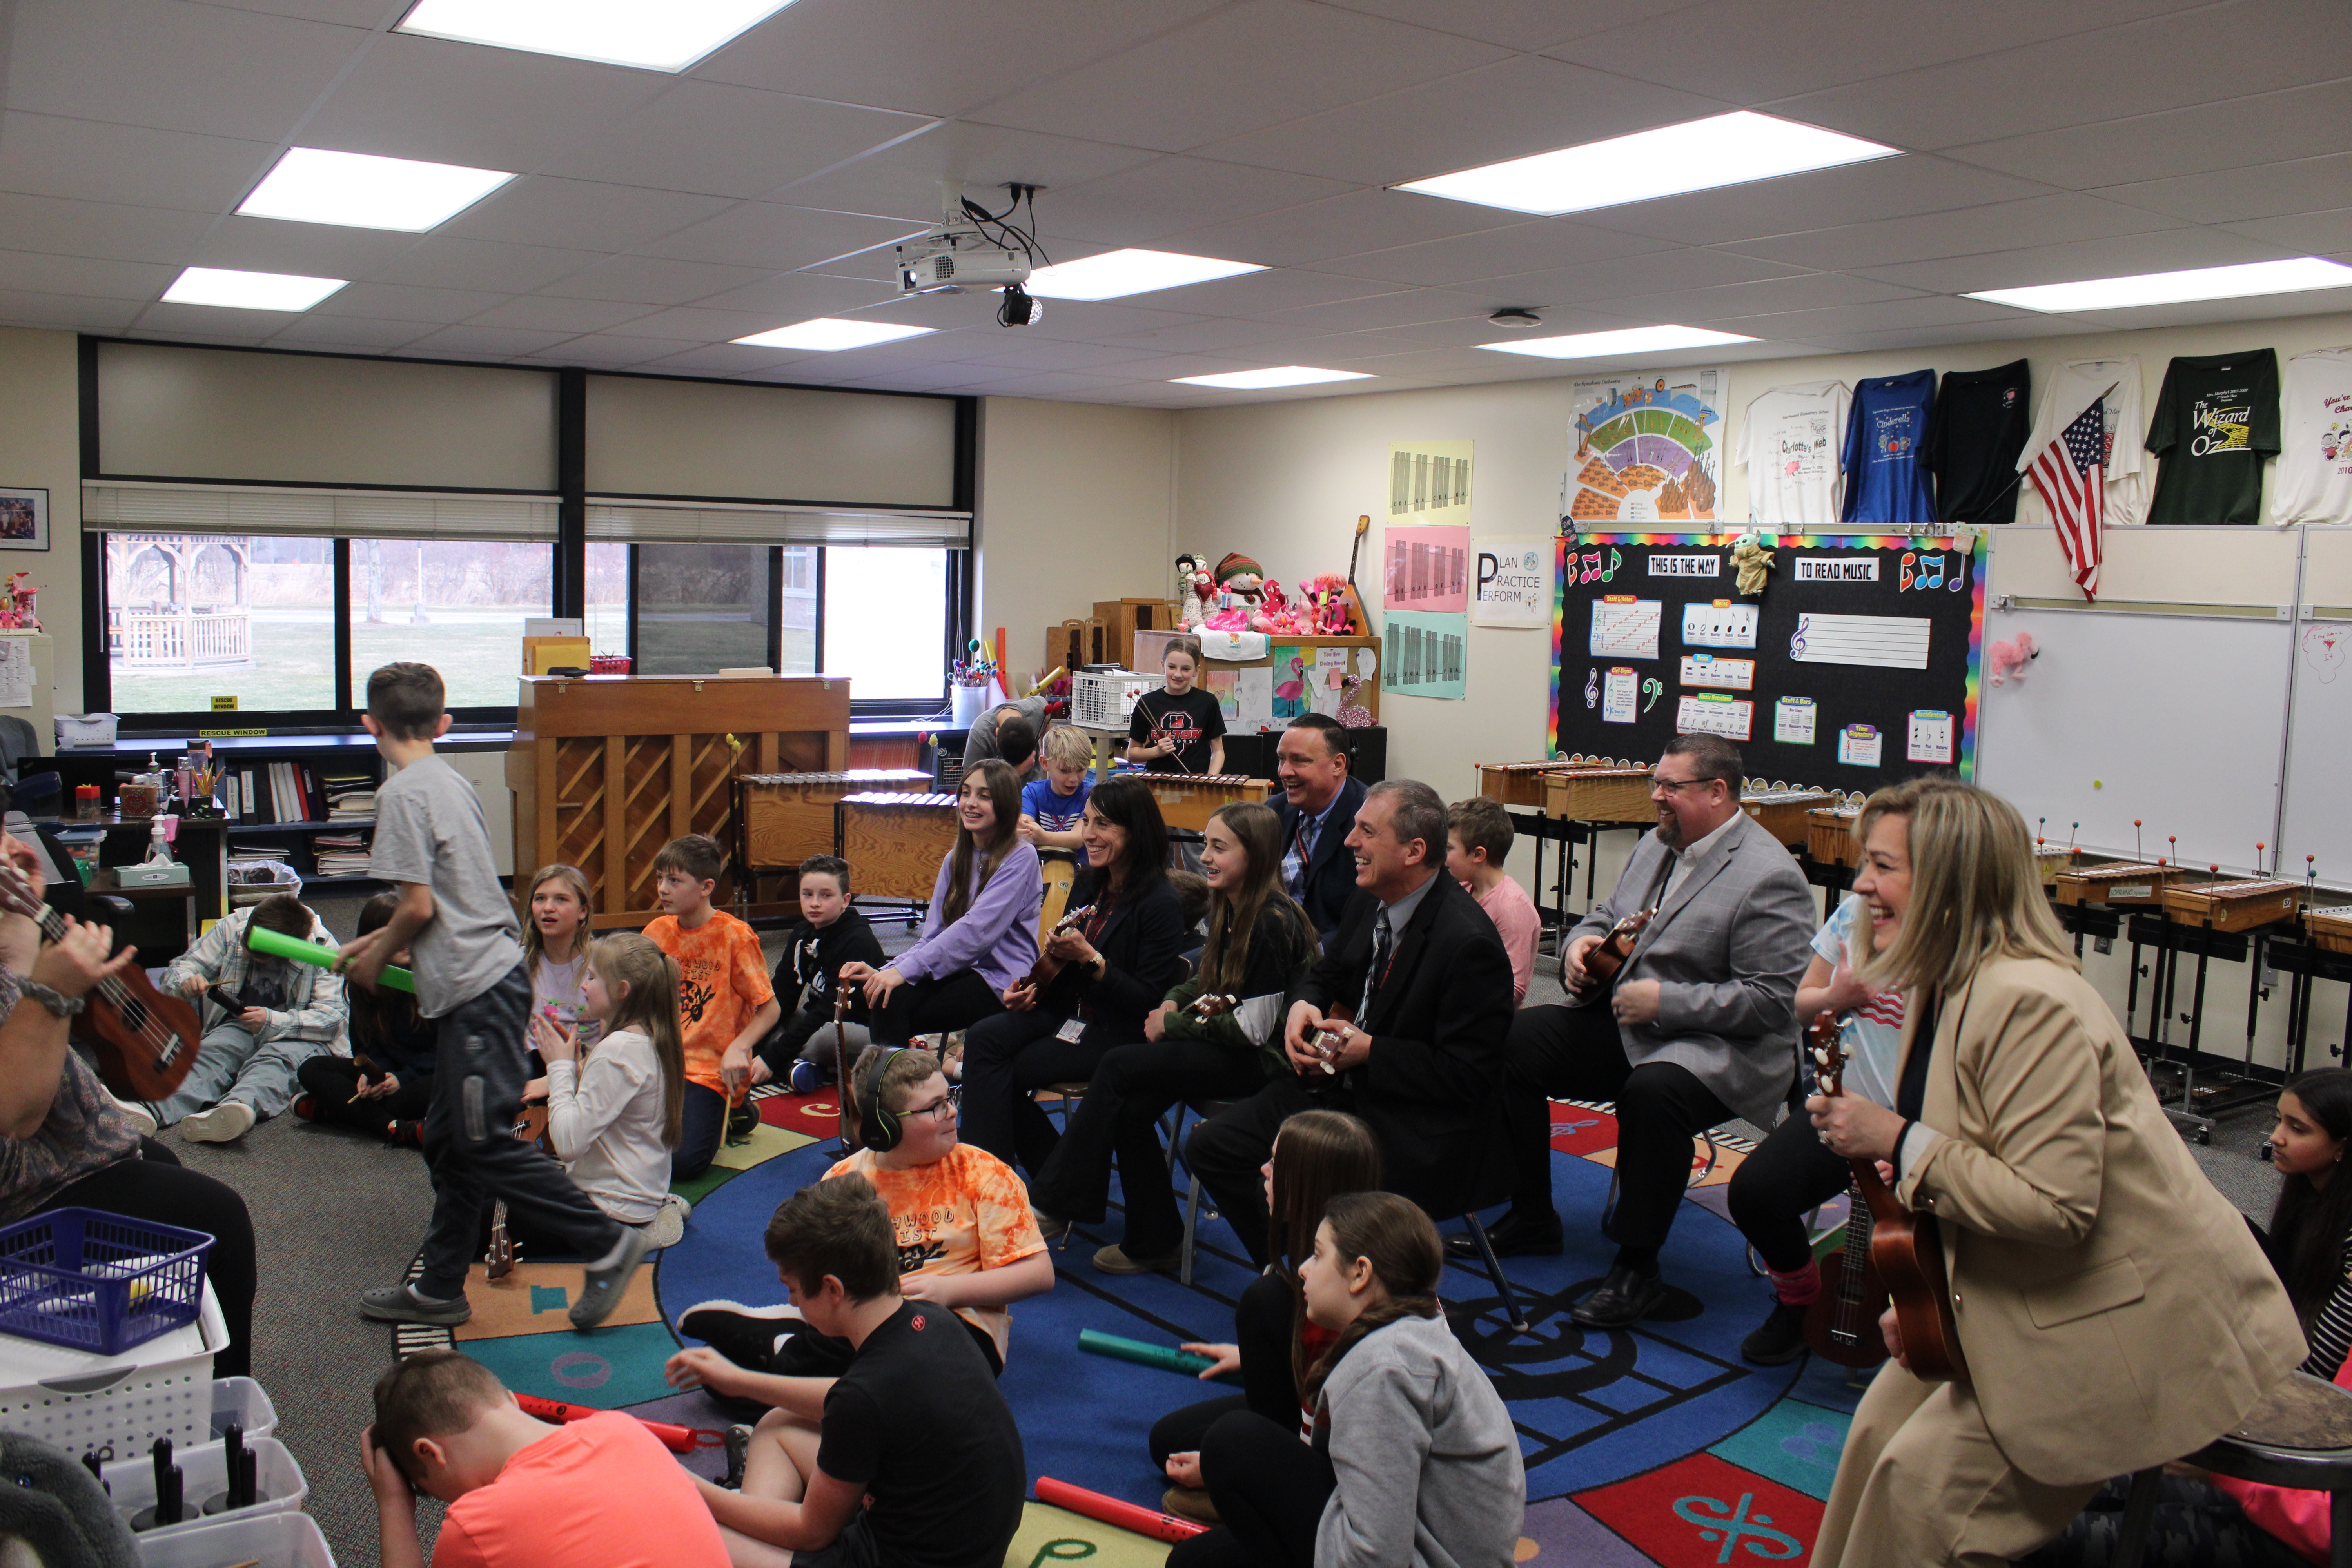 Dr. Casey Kosiorek playing instruments with students